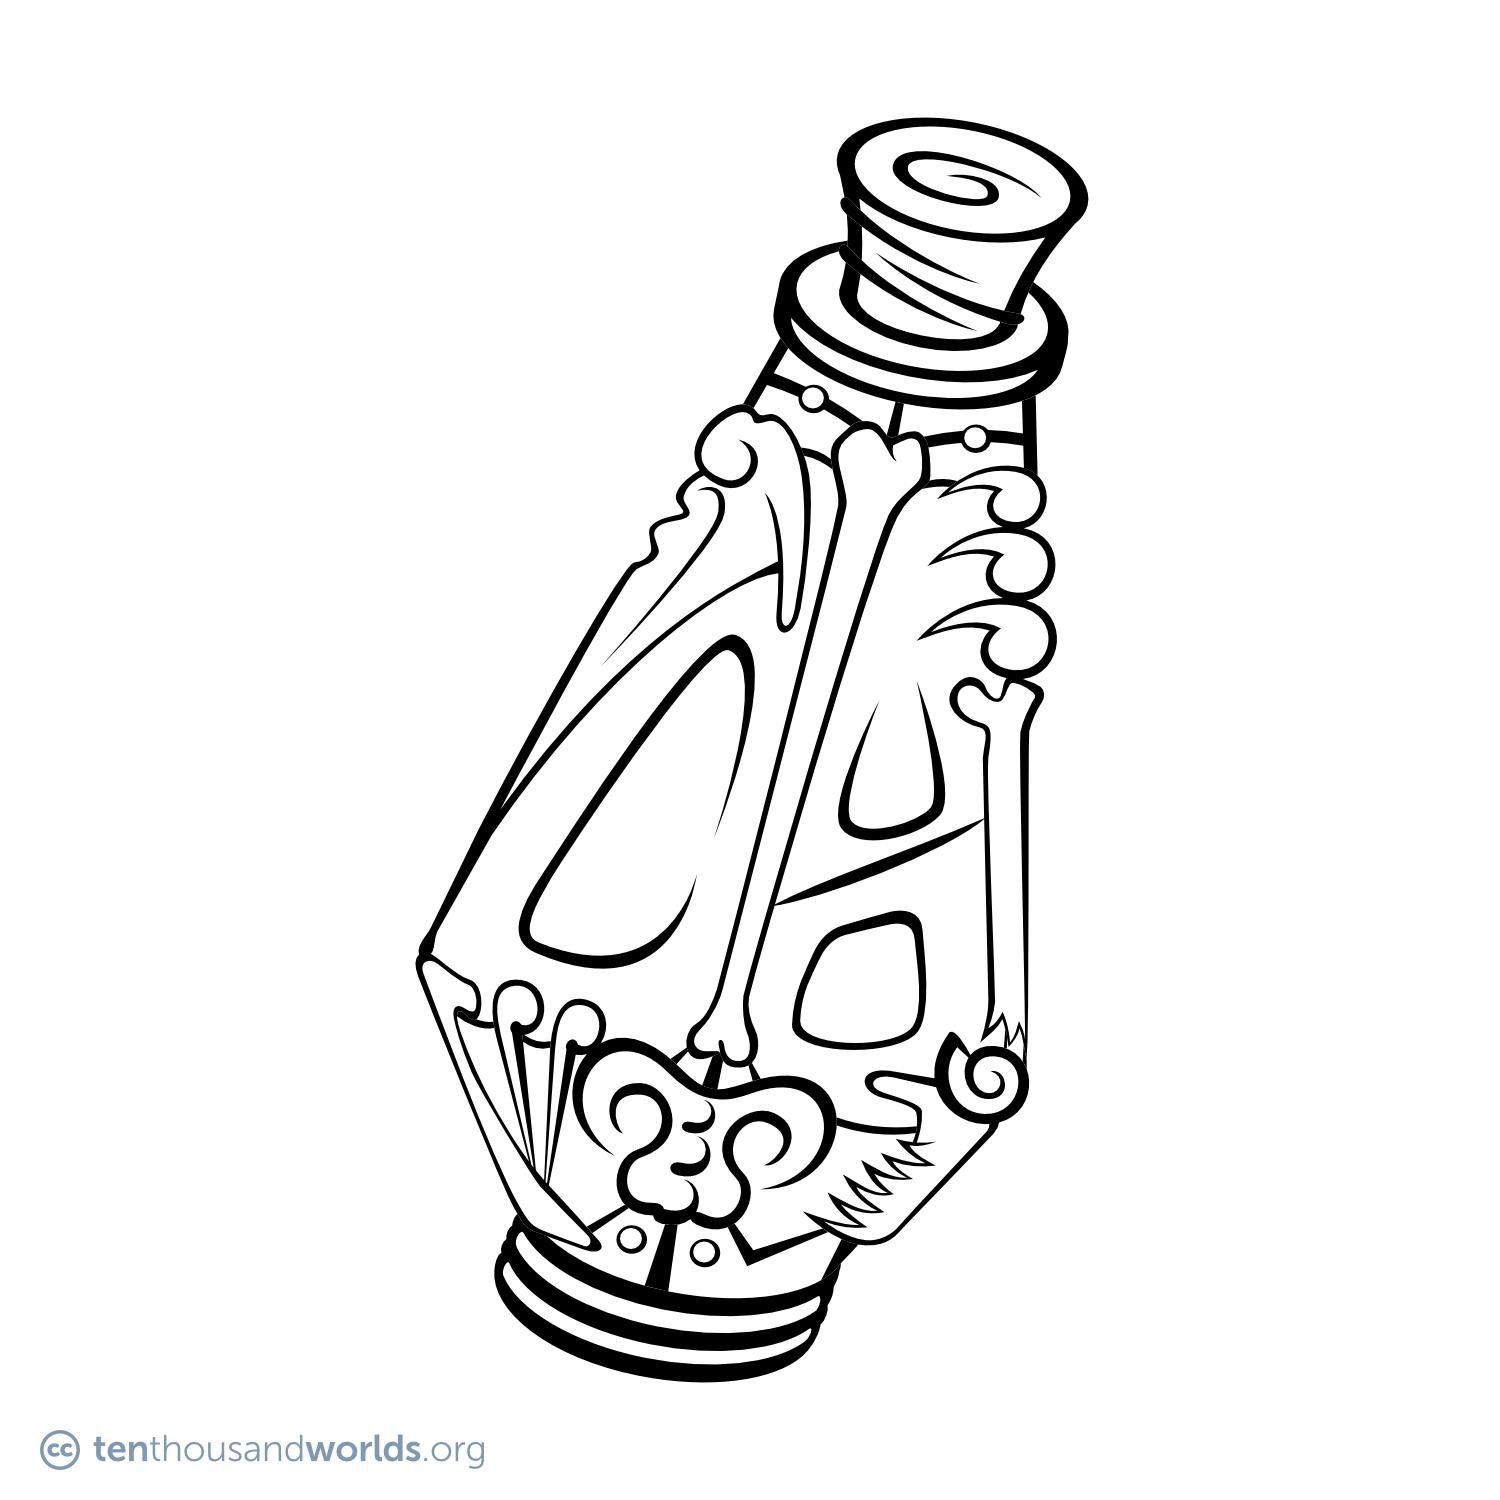 An ink outline of a tall, intricately decorated stoppered bottle made of fused glass, metal and bone.